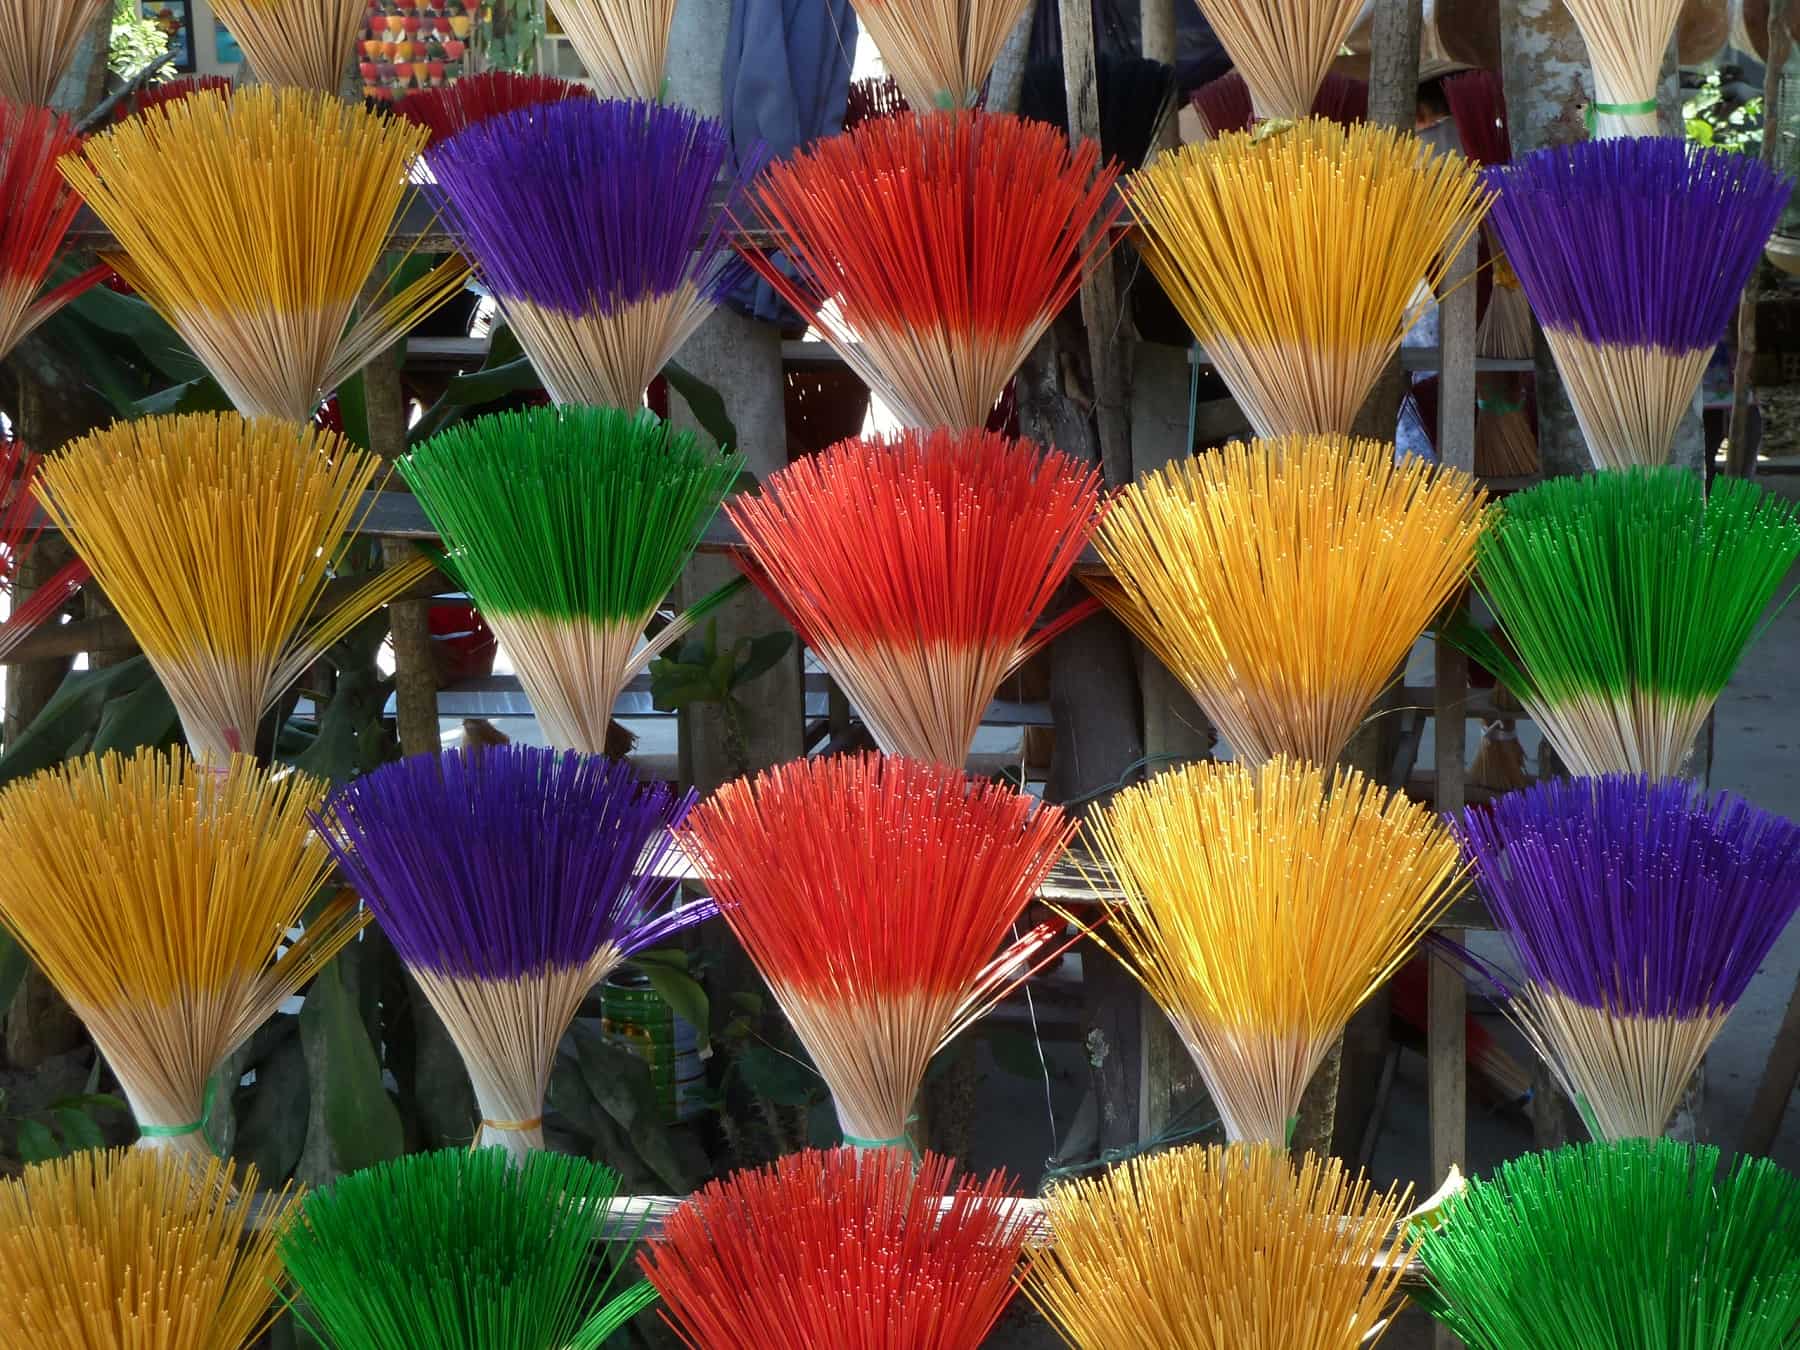 incense sticks in Thuy Xuan Village -Things to do in central Vietnam